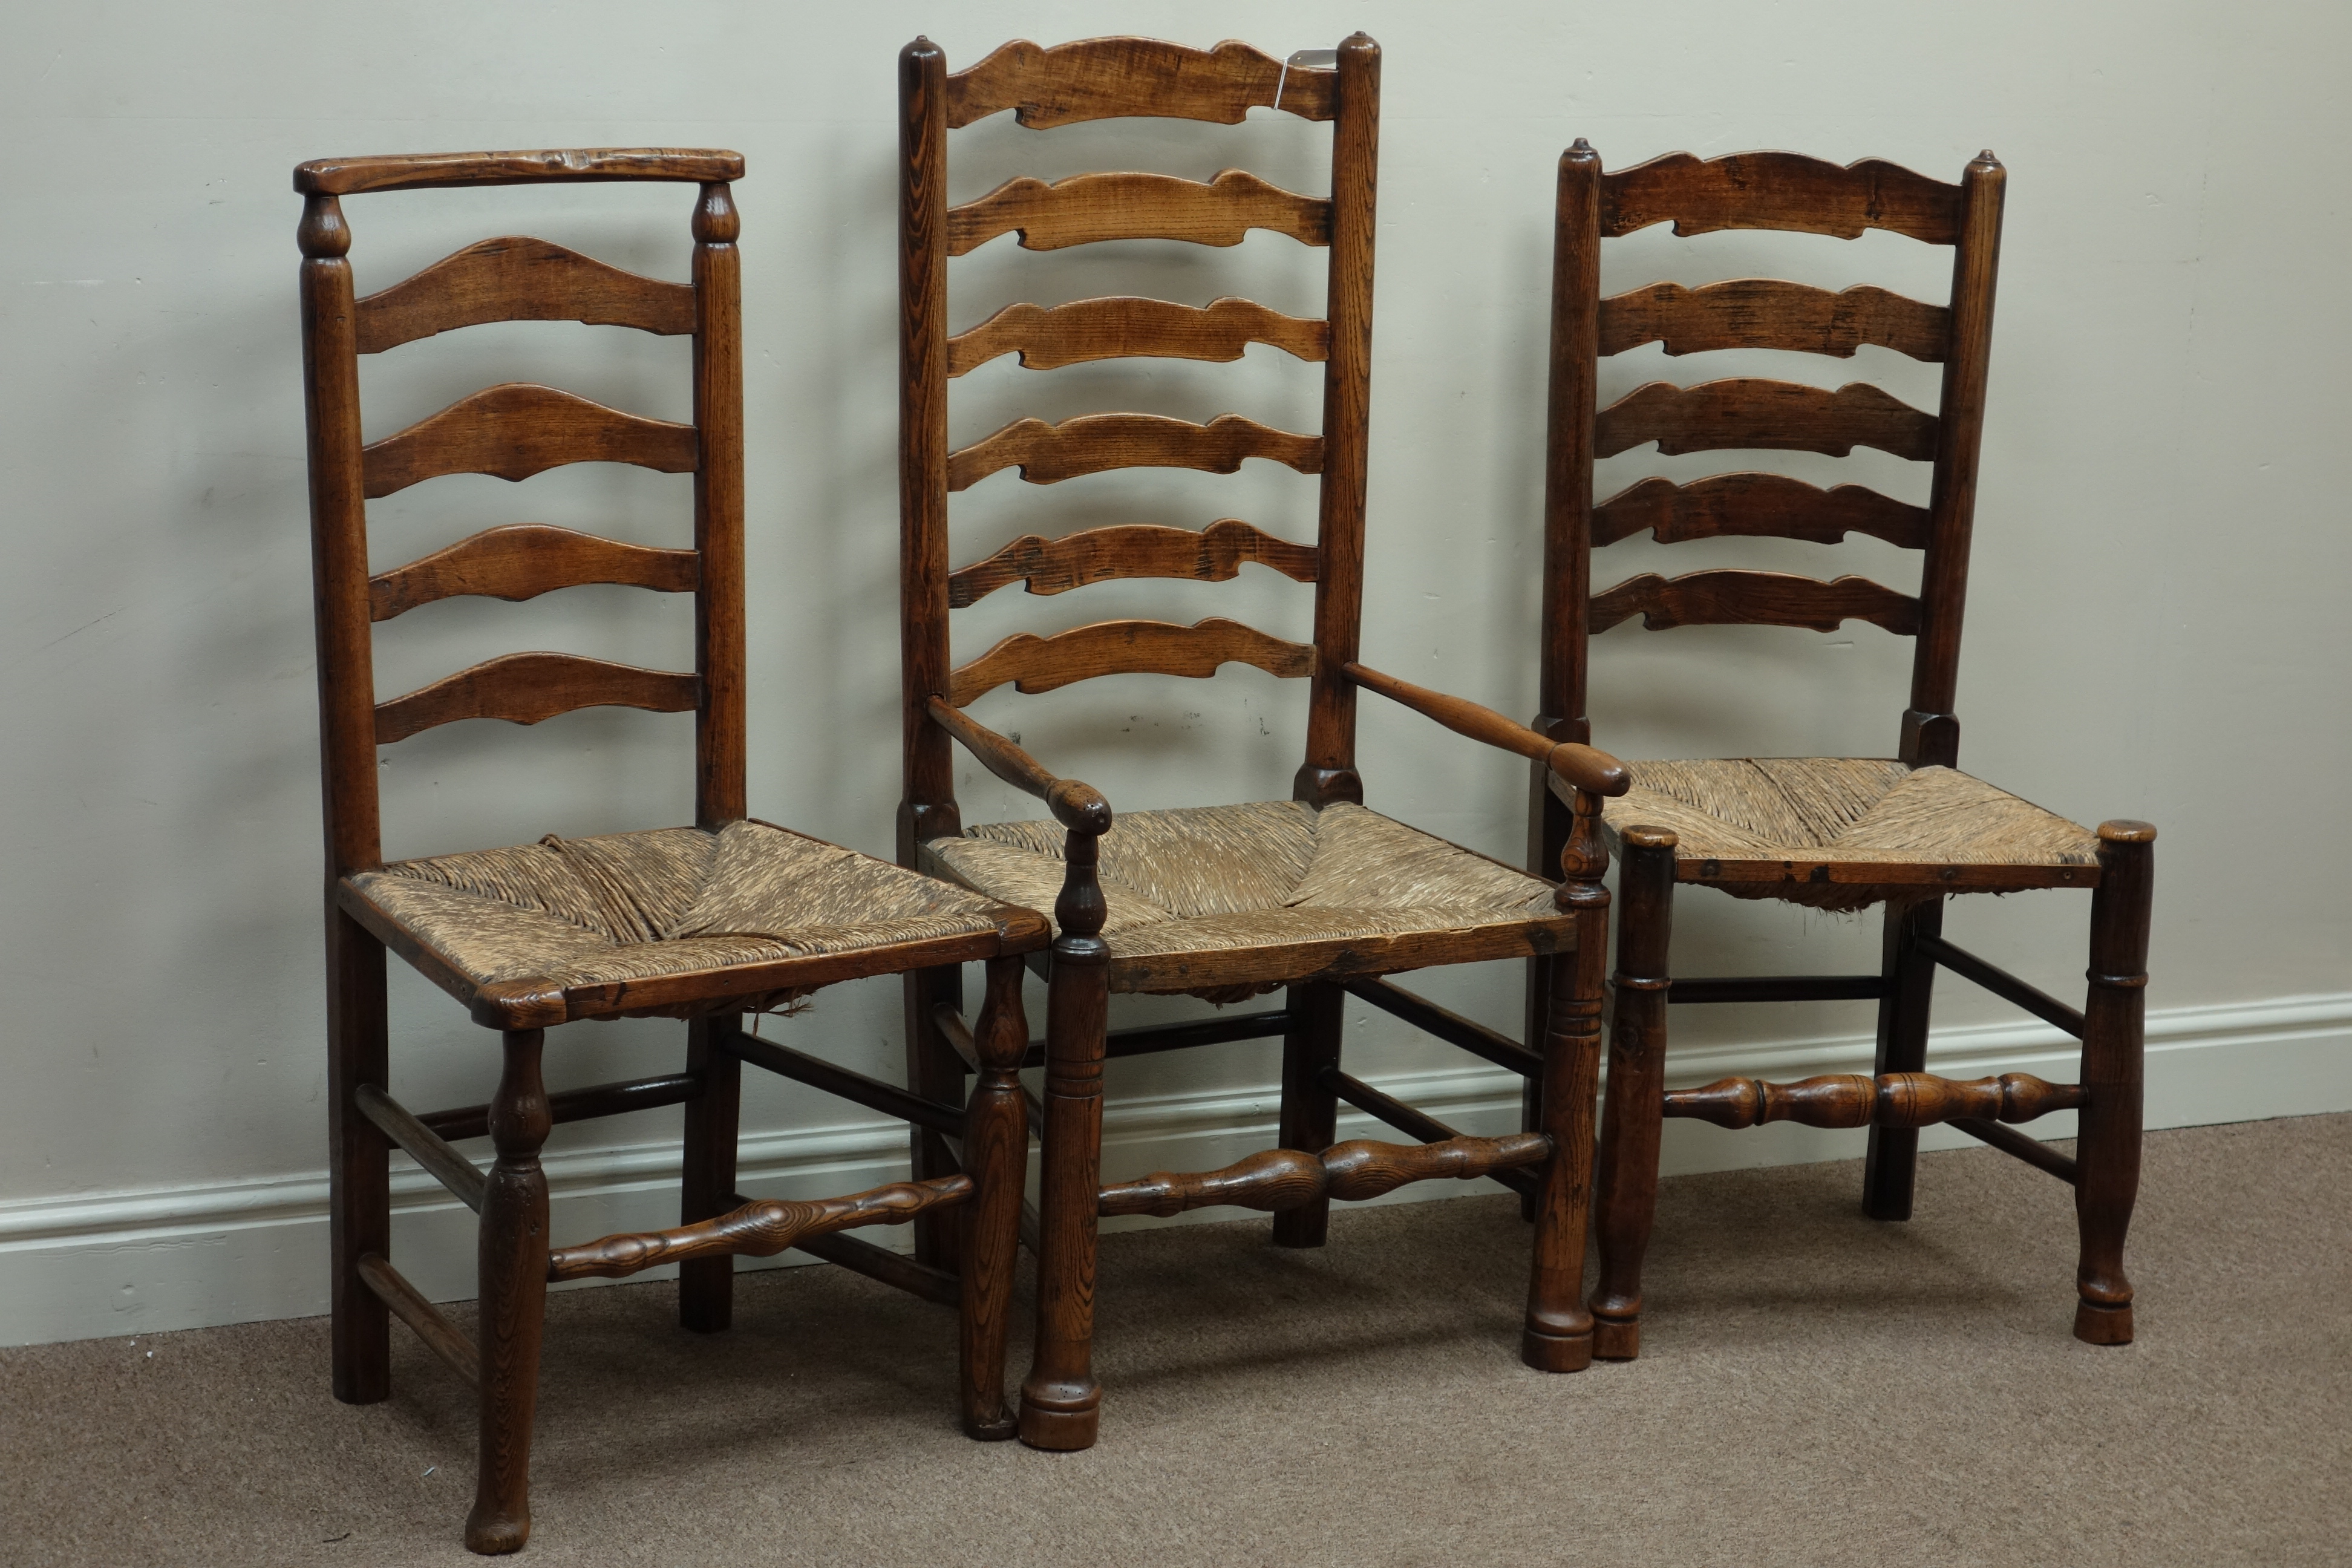 Three early 19th century country elm and oak ladder back chairs with rush seats Condition